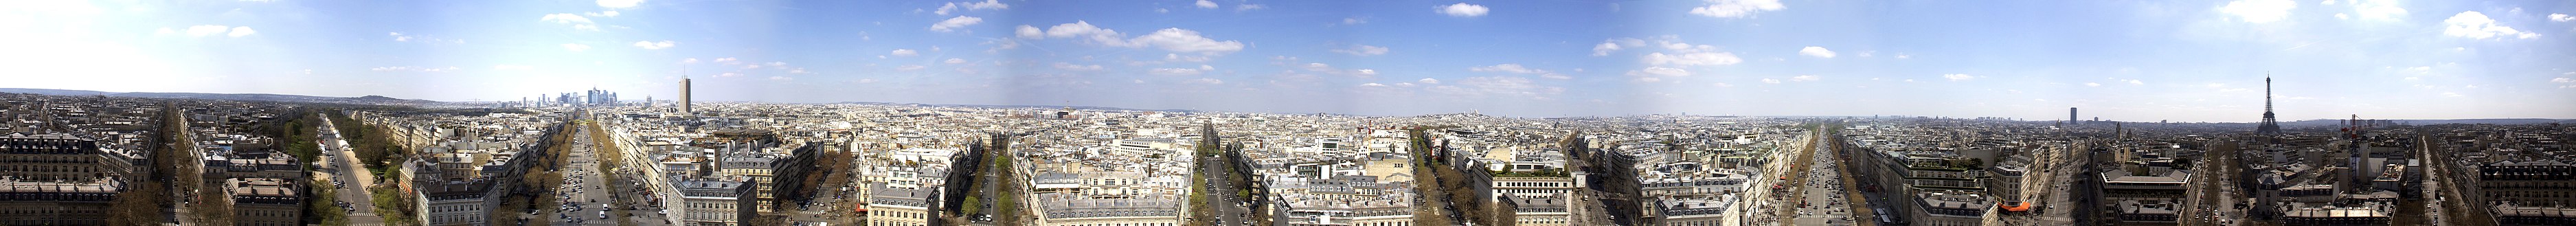 Paris seen from the top of the Arc de Triomphe.